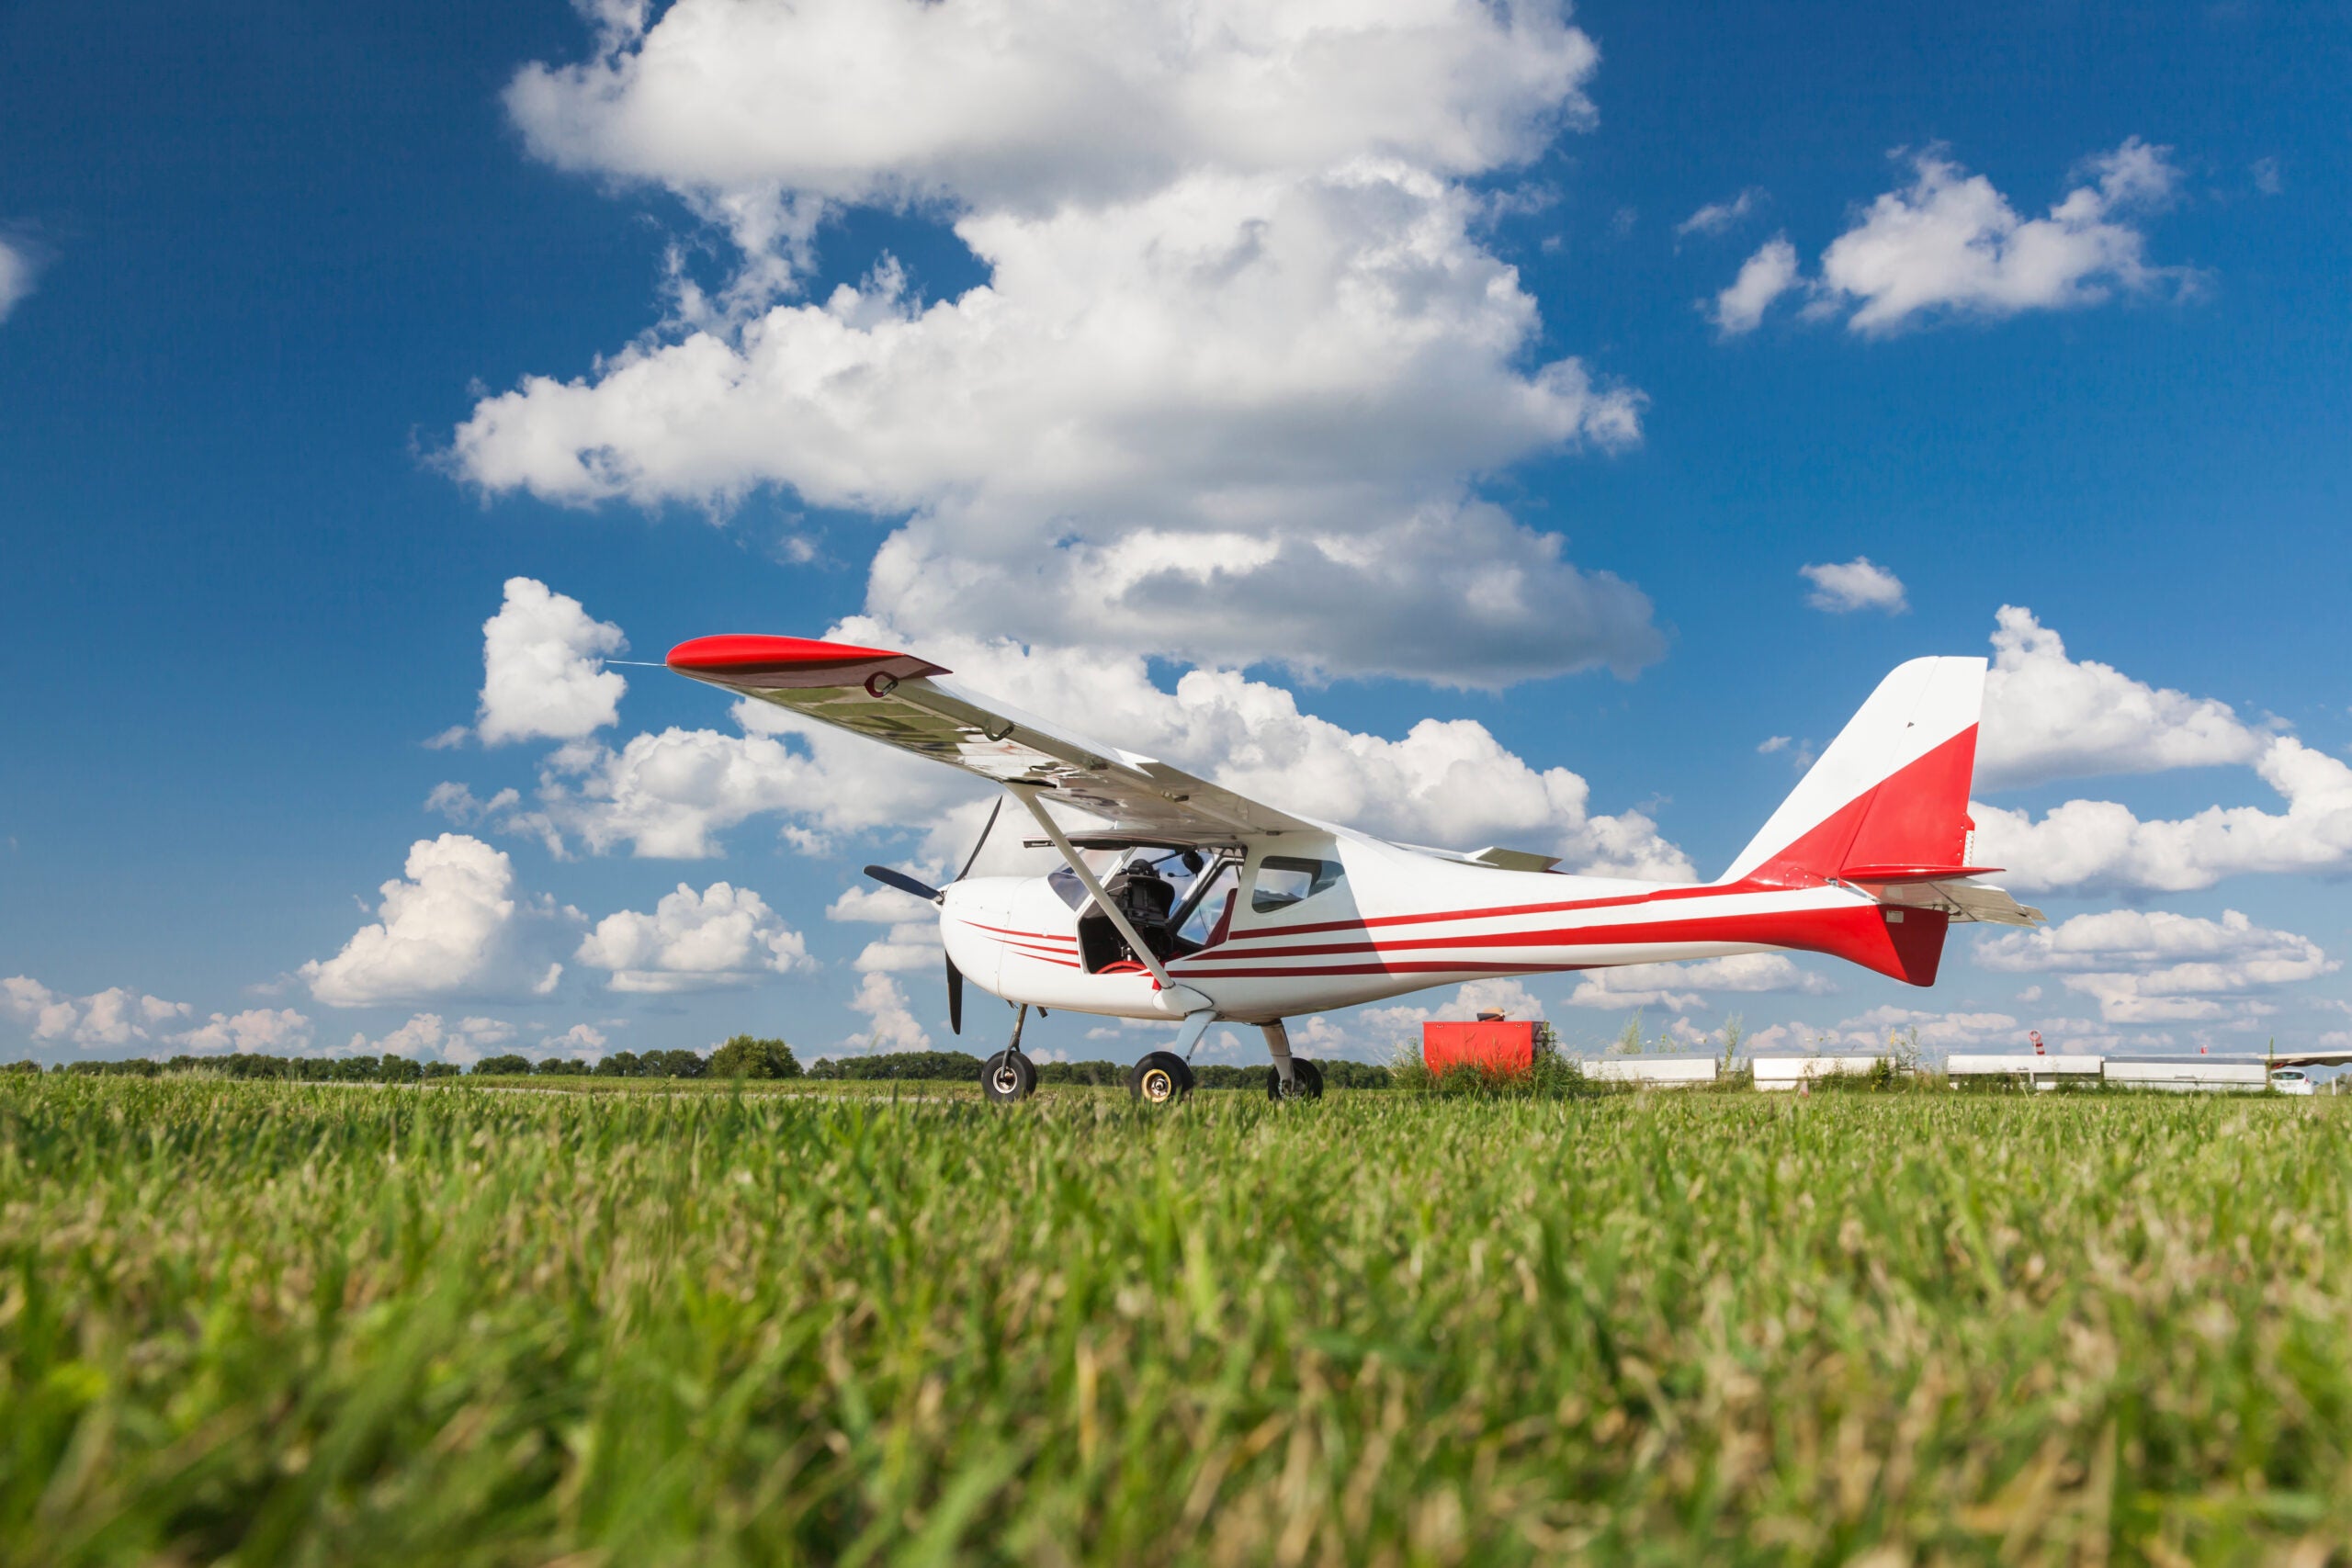 FAA Acknowledges Some Pilots Prefer Operating ‘On the Grass’